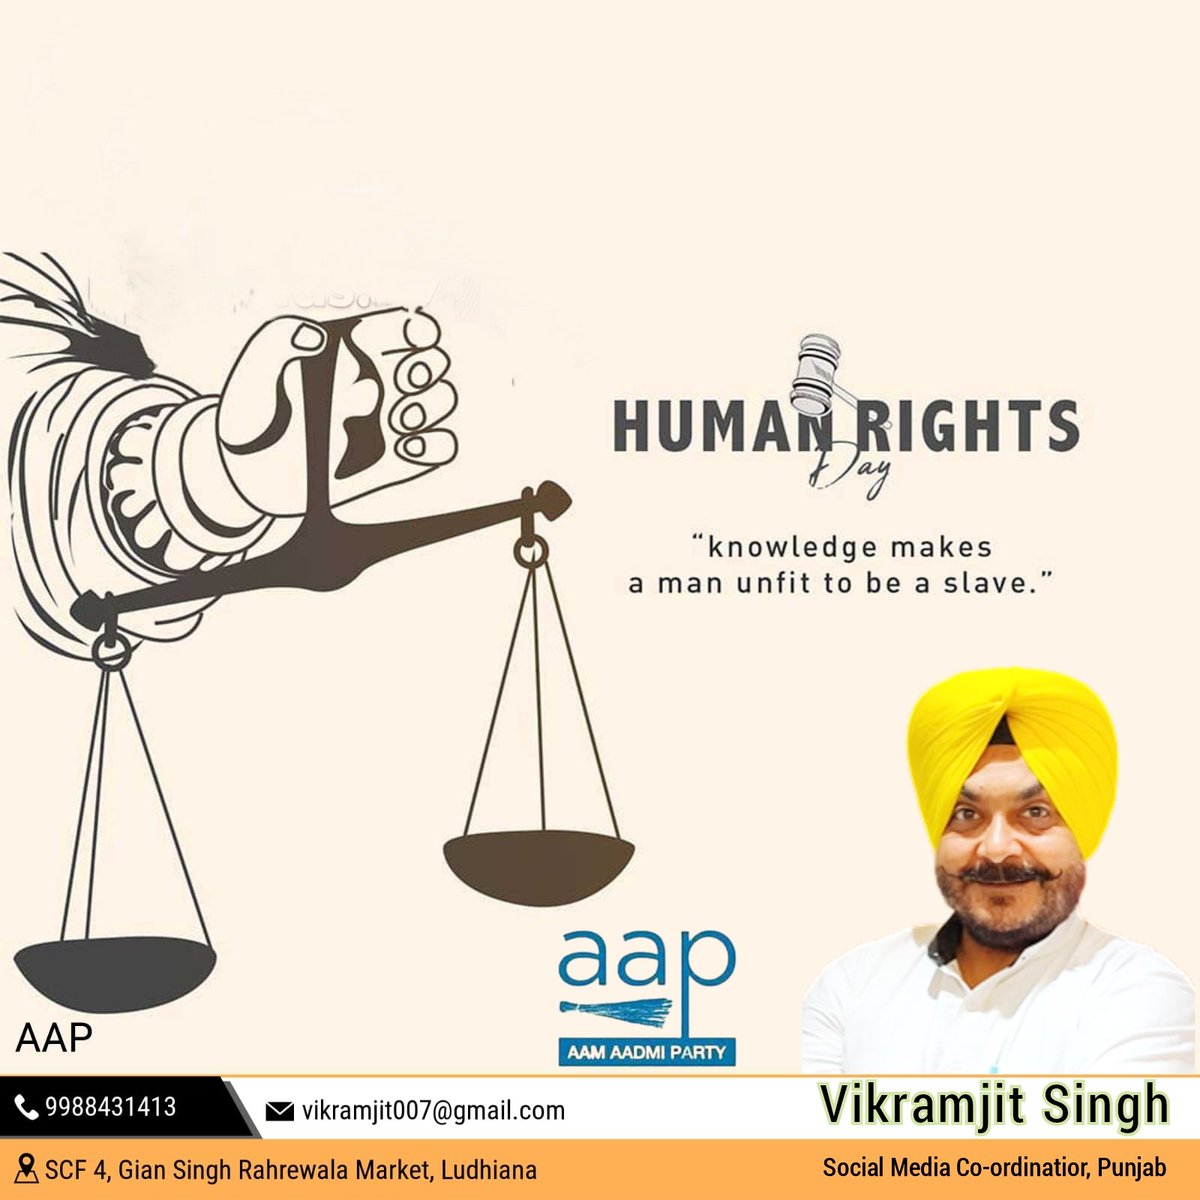 “A right delayed is a right denied.” – Martin Luther King, Jr.
#WorldHumanRightsDay_2022 #HumanRightsDay #humanity #AAP